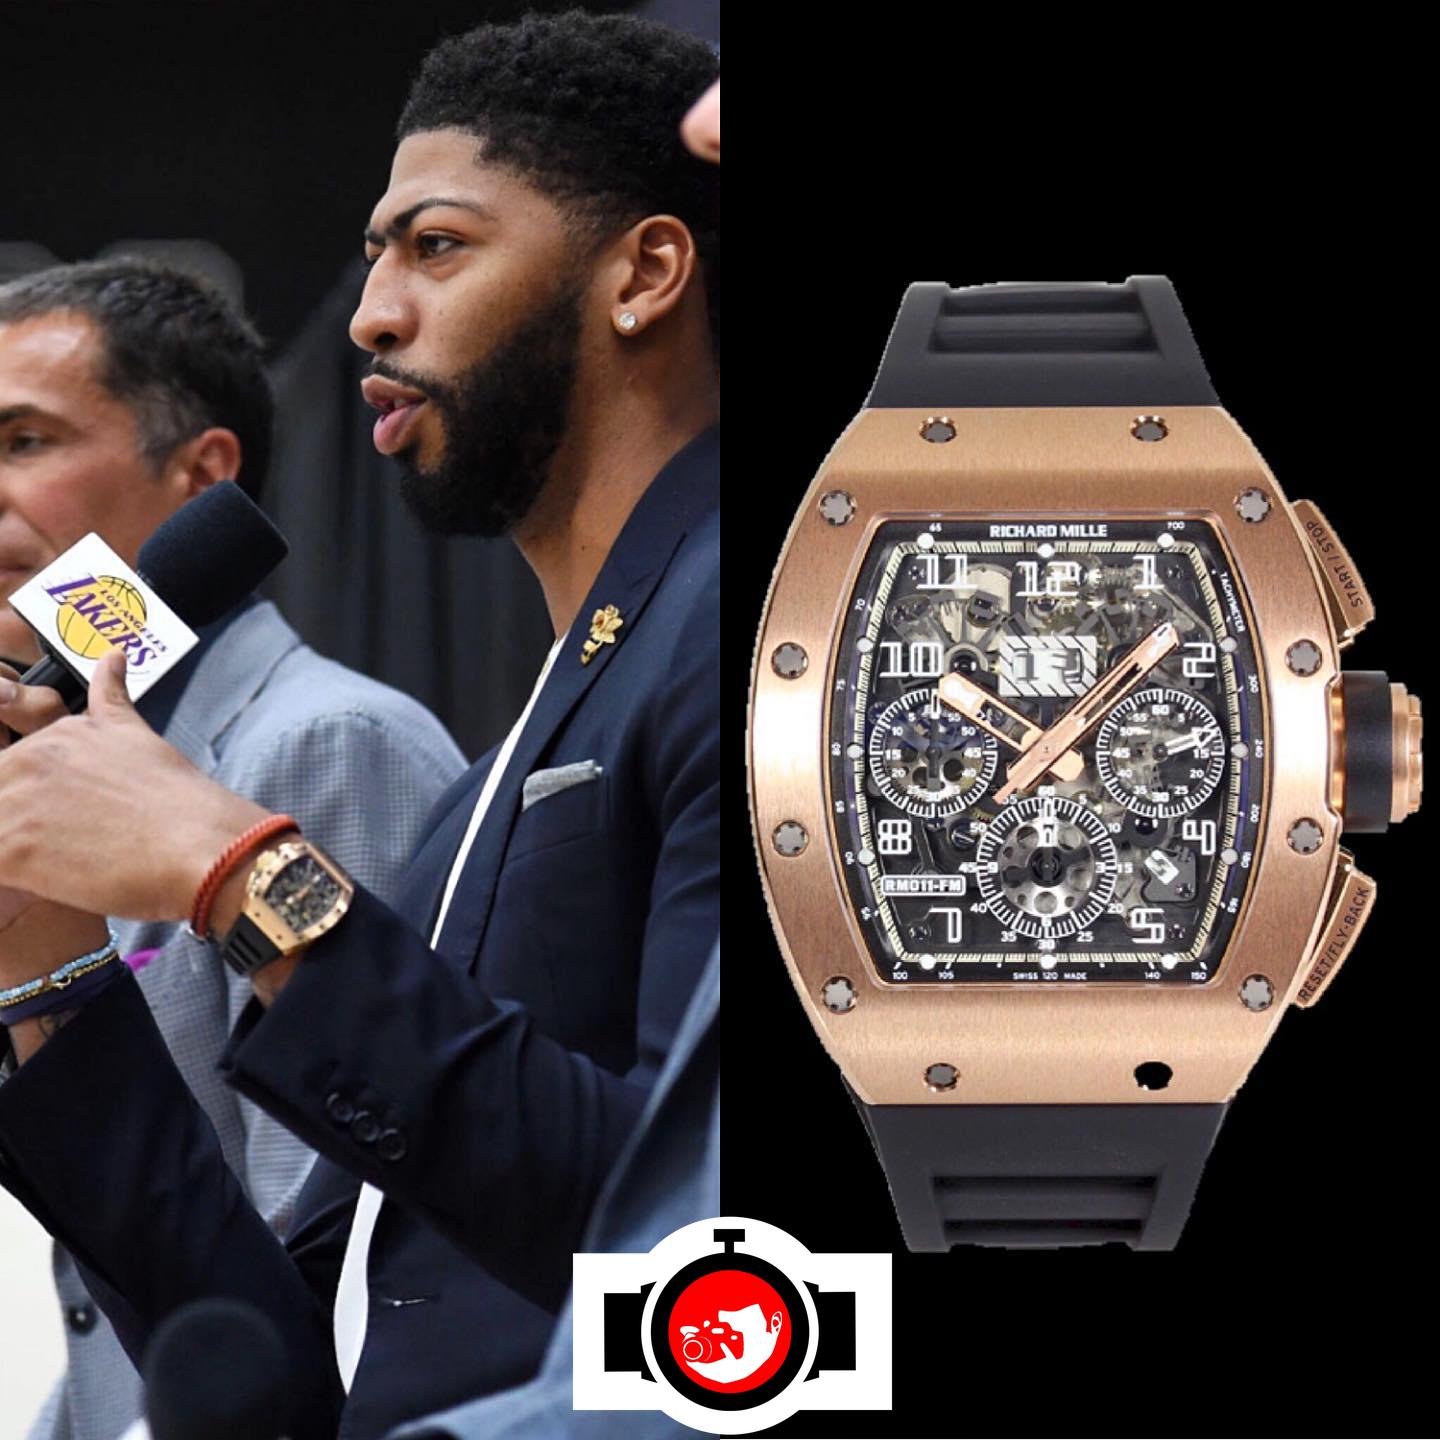 Anthony Davis's Impressive Watch Collection Features Rare Richard Mille RM011 Felipe Massa Boutique Edition in 18K Rose Gold